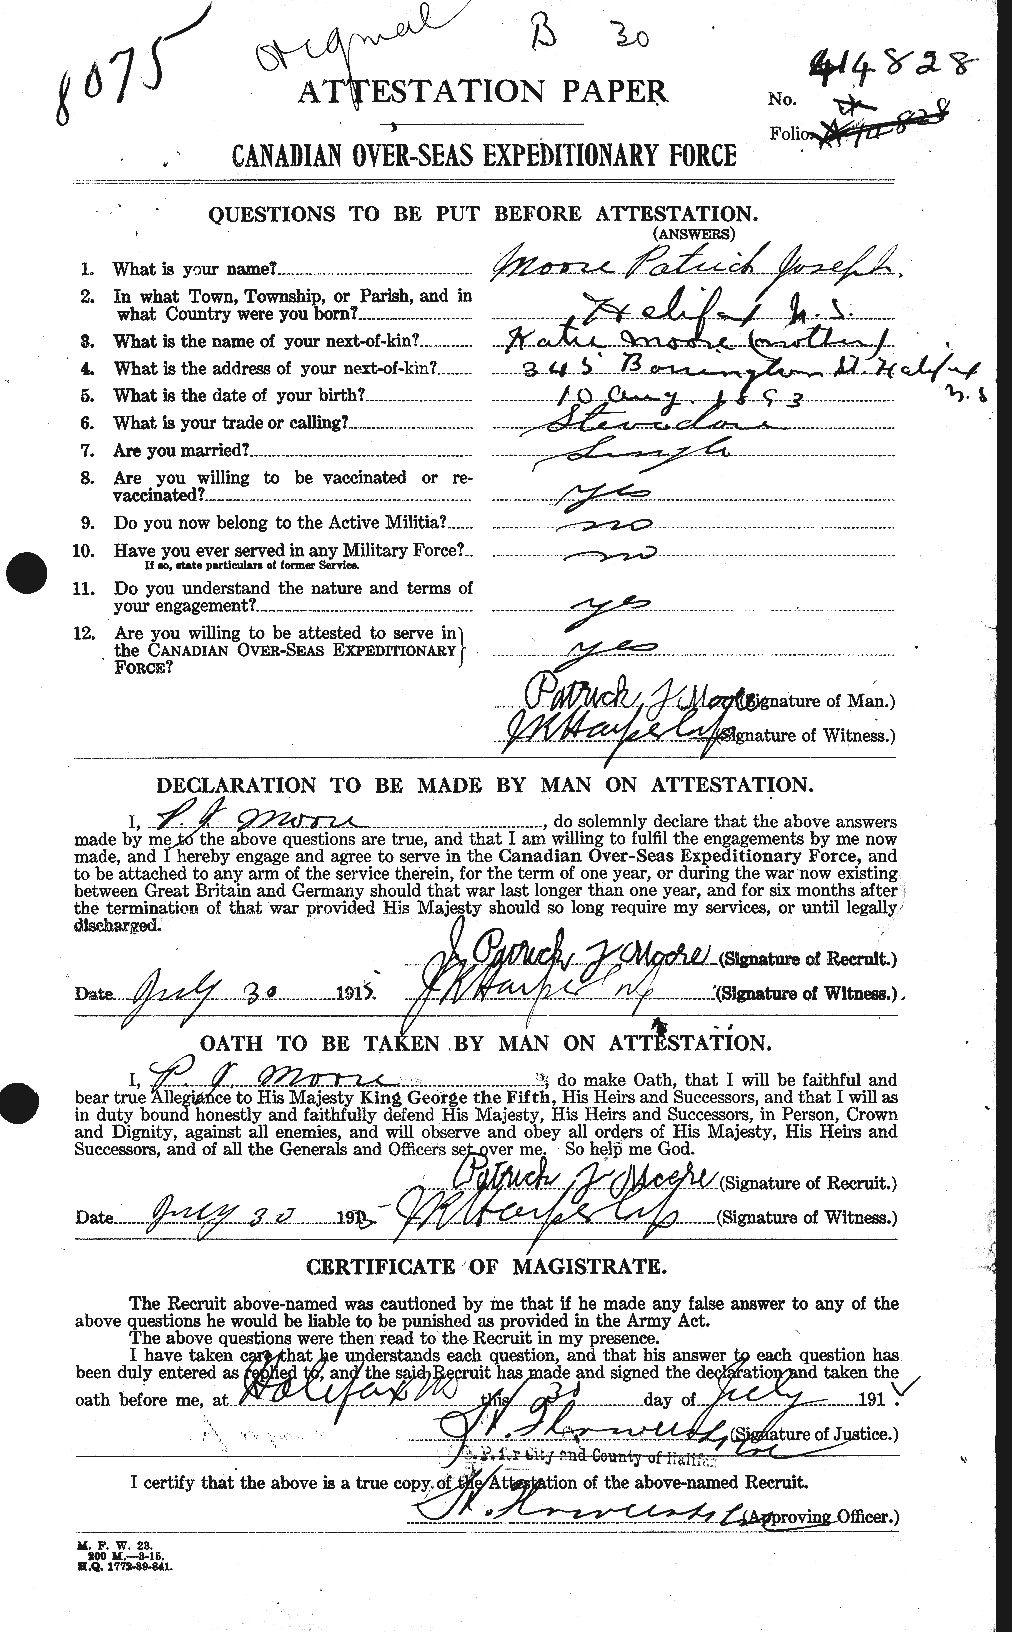 Personnel Records of the First World War - CEF 503476a